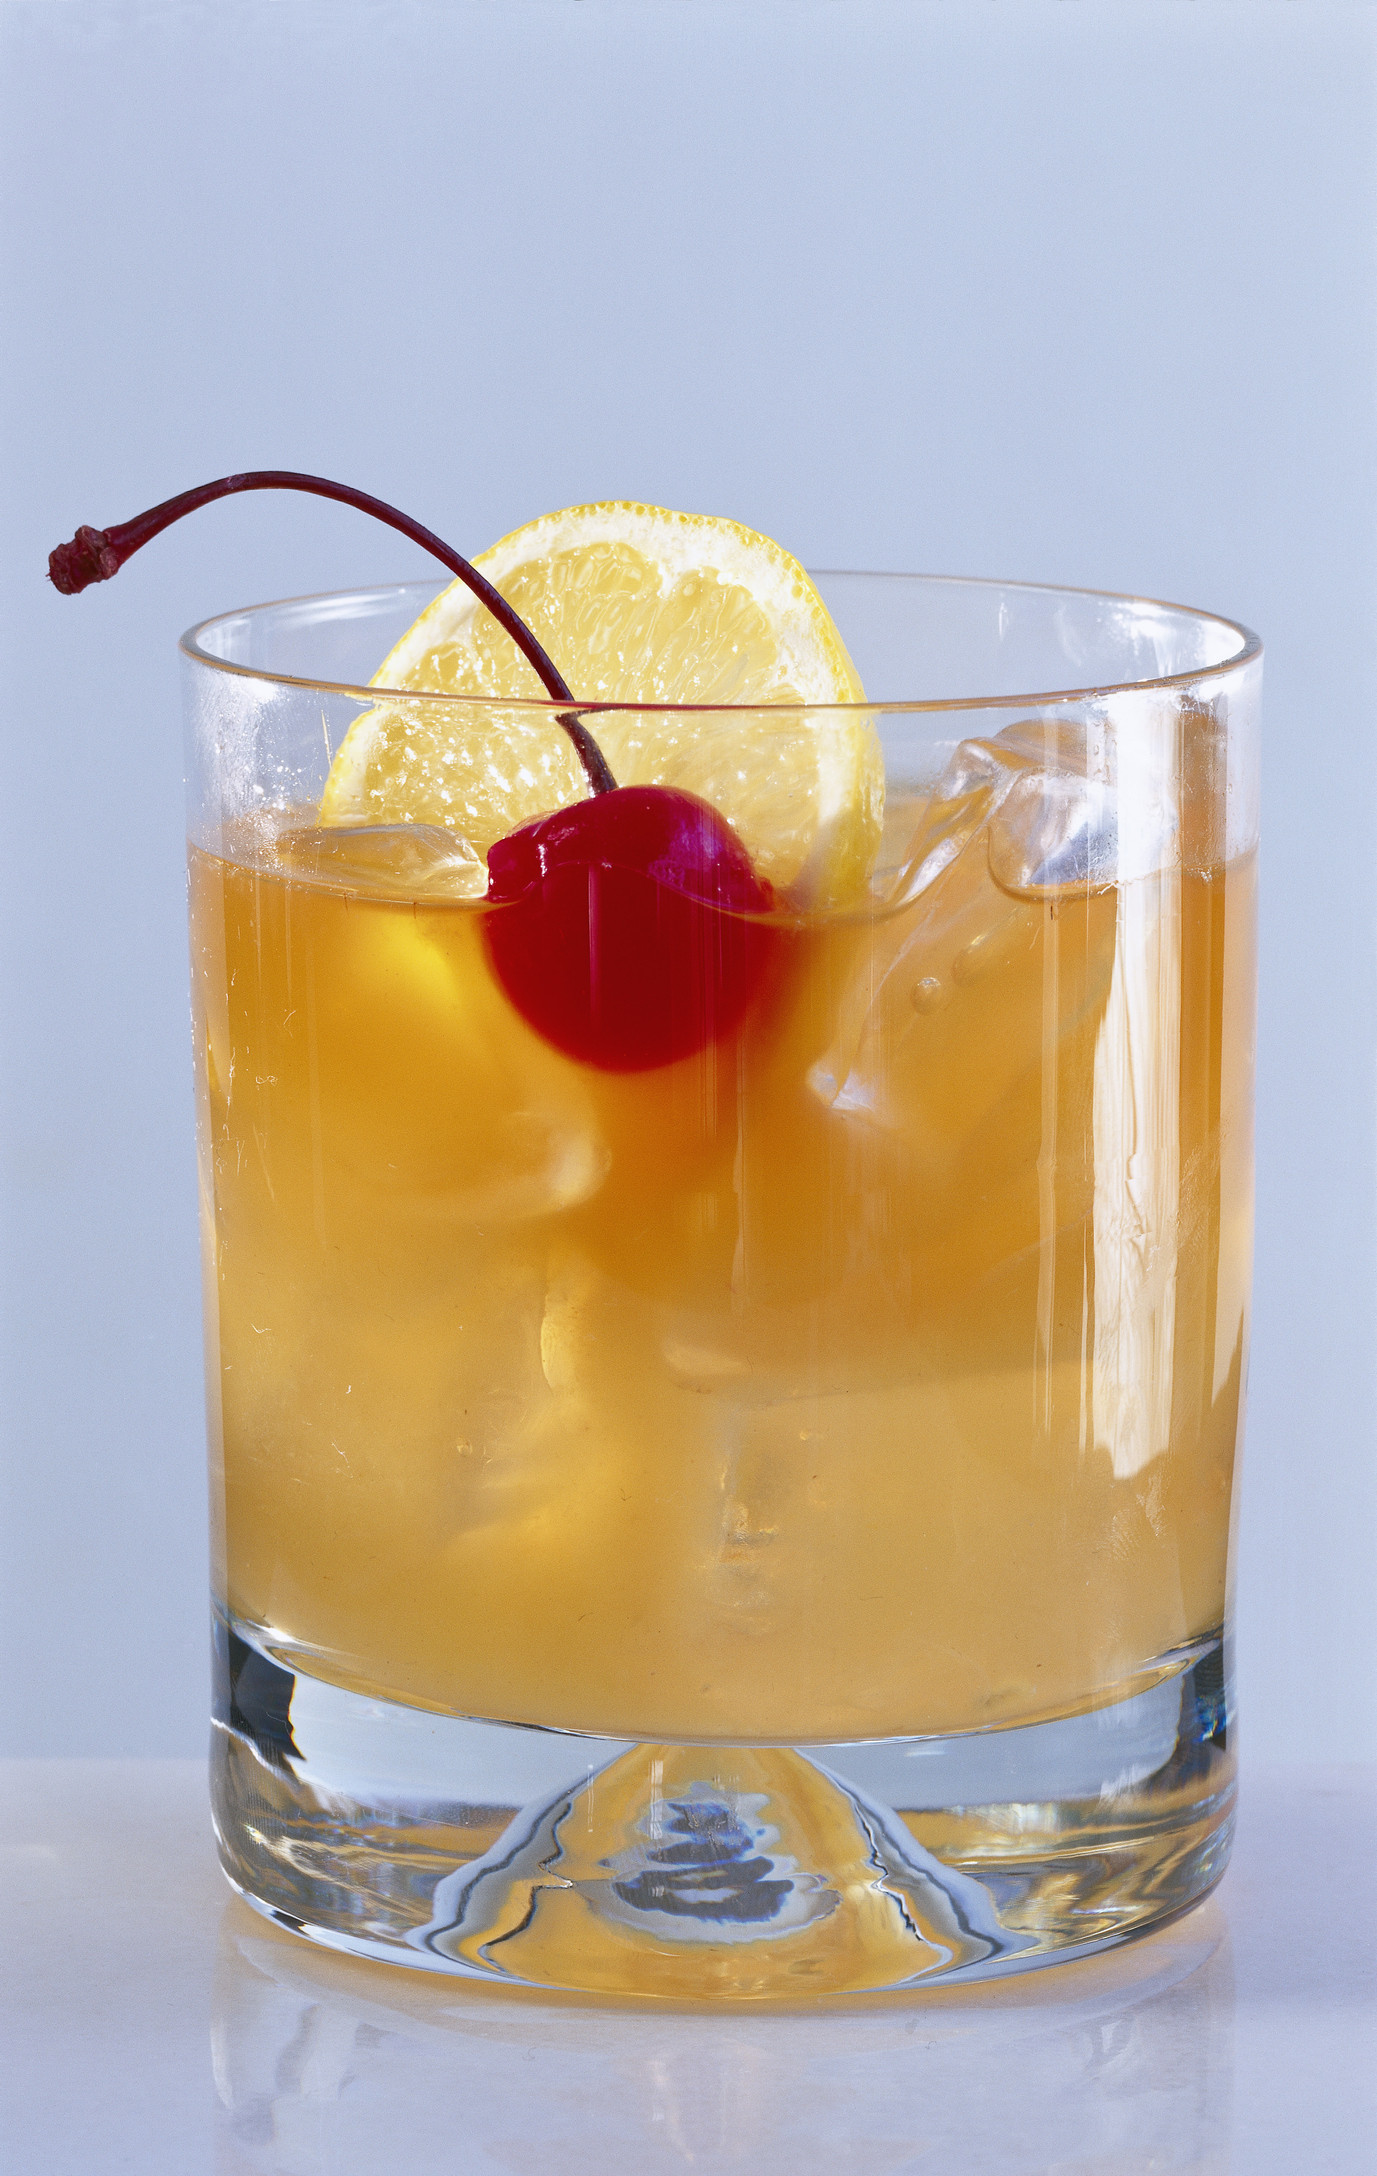 The Best Ideas for Whiskey Summer Drinks - Home, Family, Style and Art